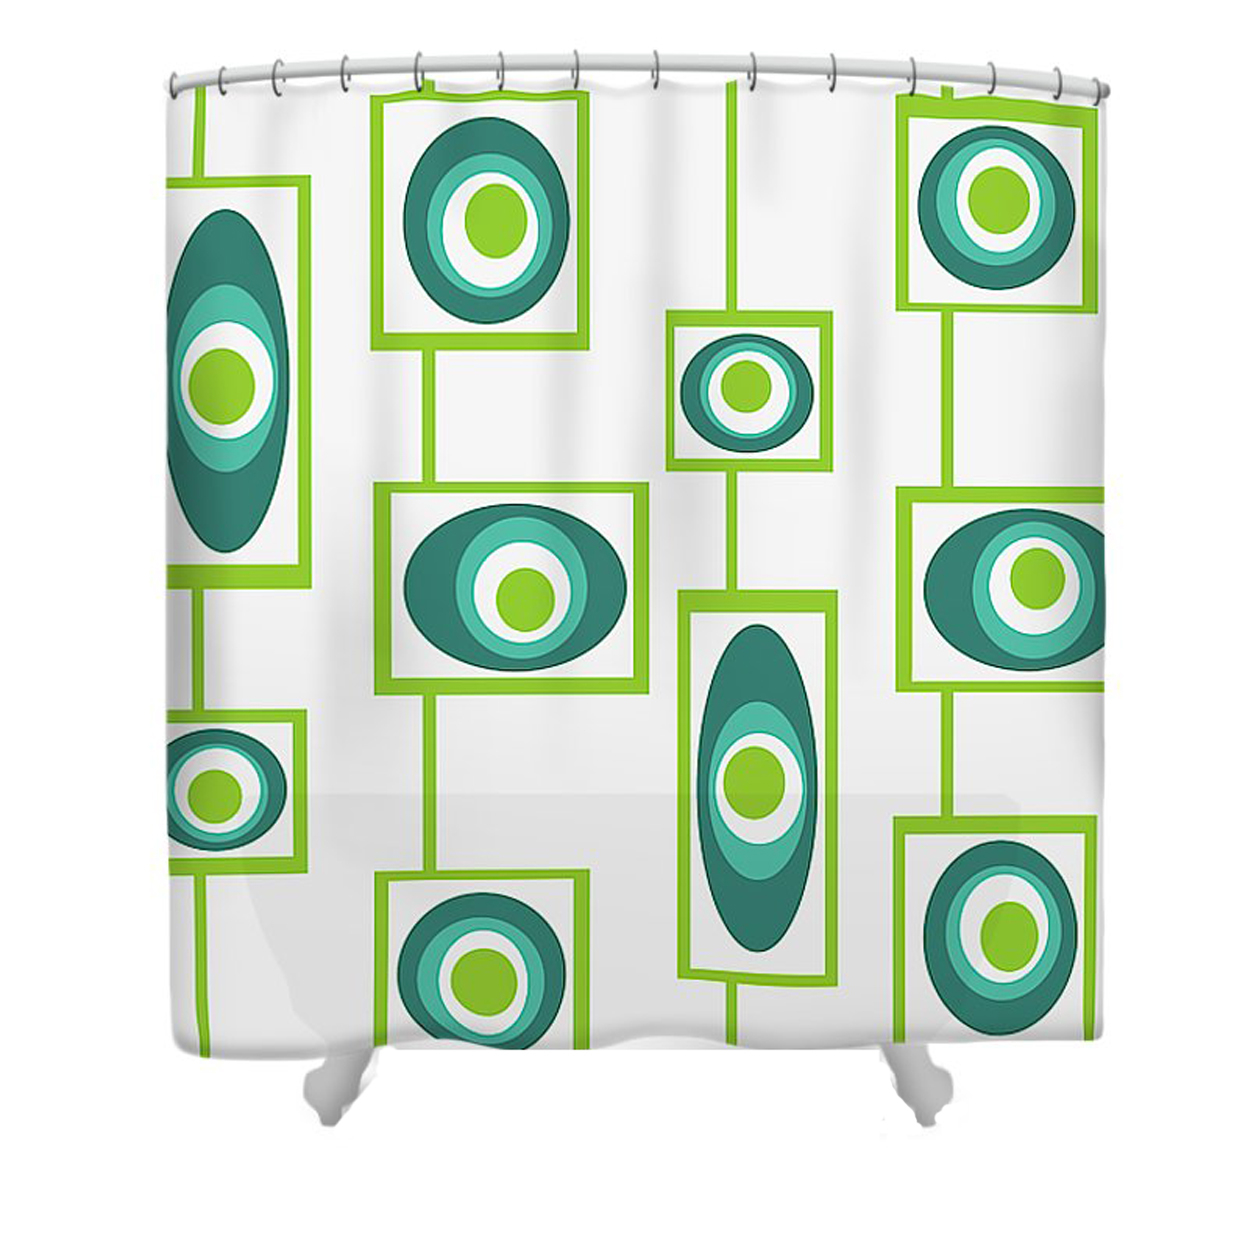 Shower Curtain - Crash Pad Designs Colby